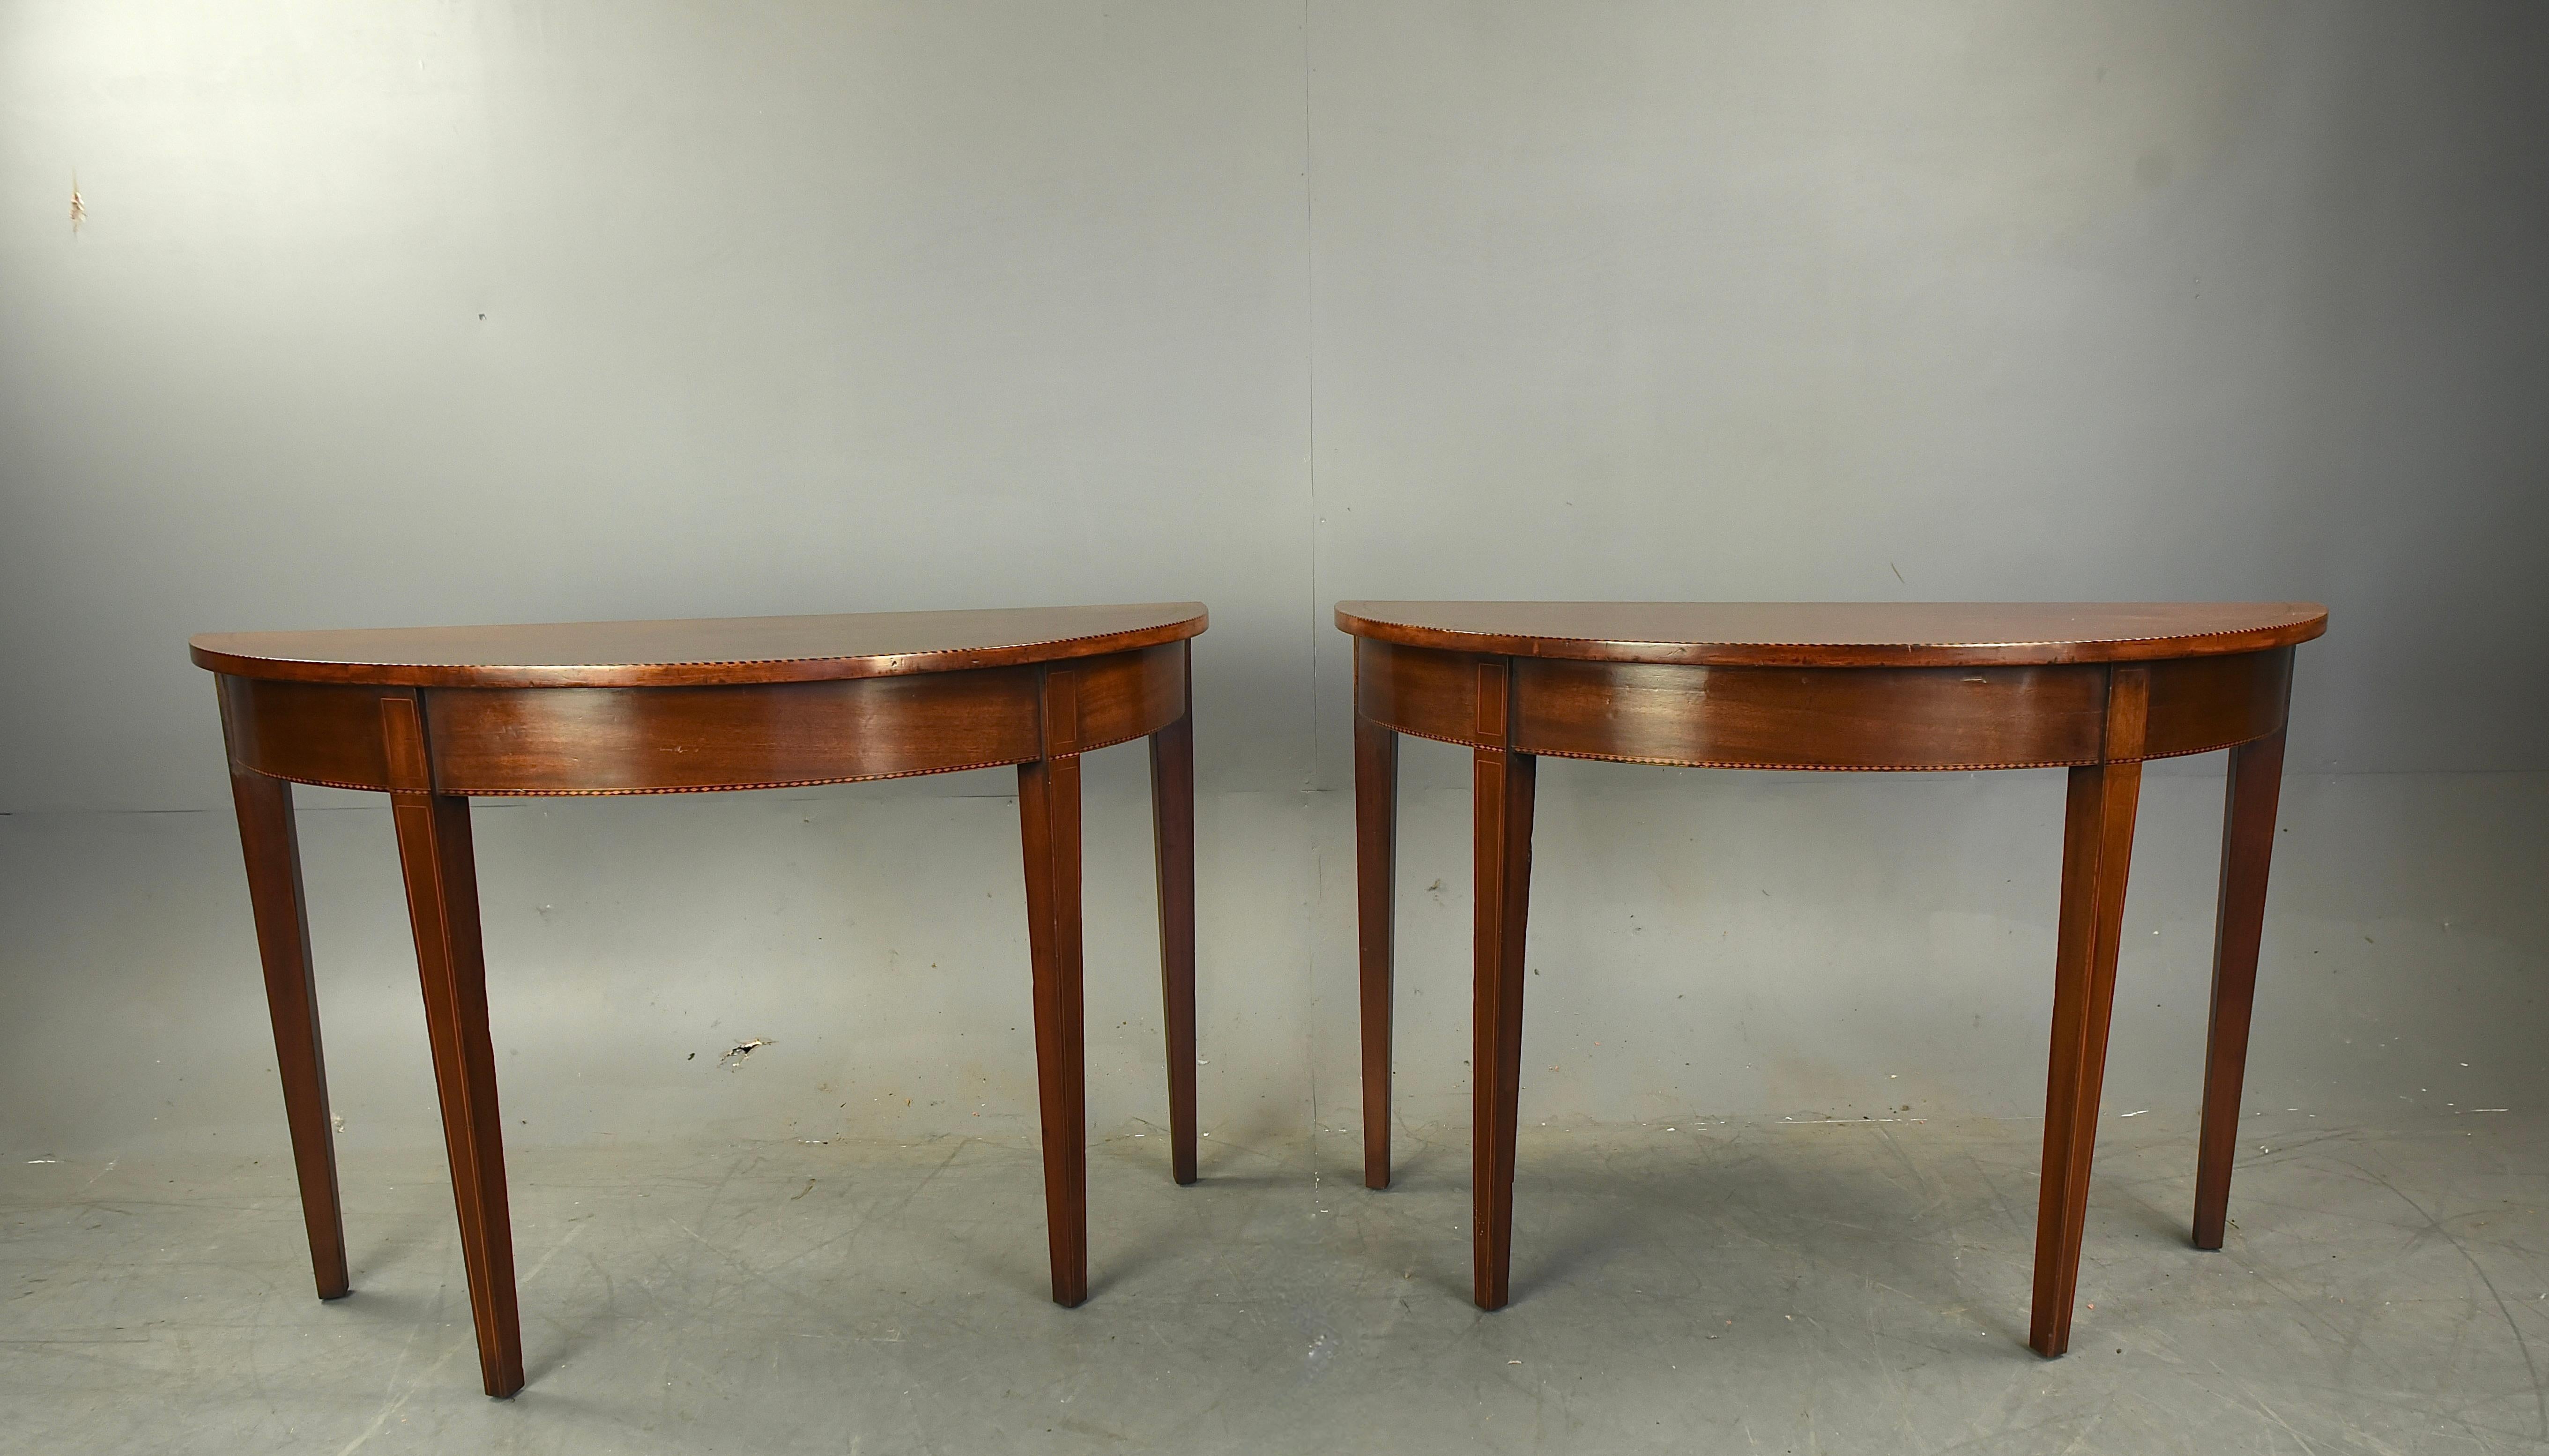 Good quality pair of Georgian mahogany console tables 
They are constructed of solid Mahogany through out with an unusual chequered inlay edging ,they stand four very elegant  line inlaid legs , 
The tables are in very good condition with no damage